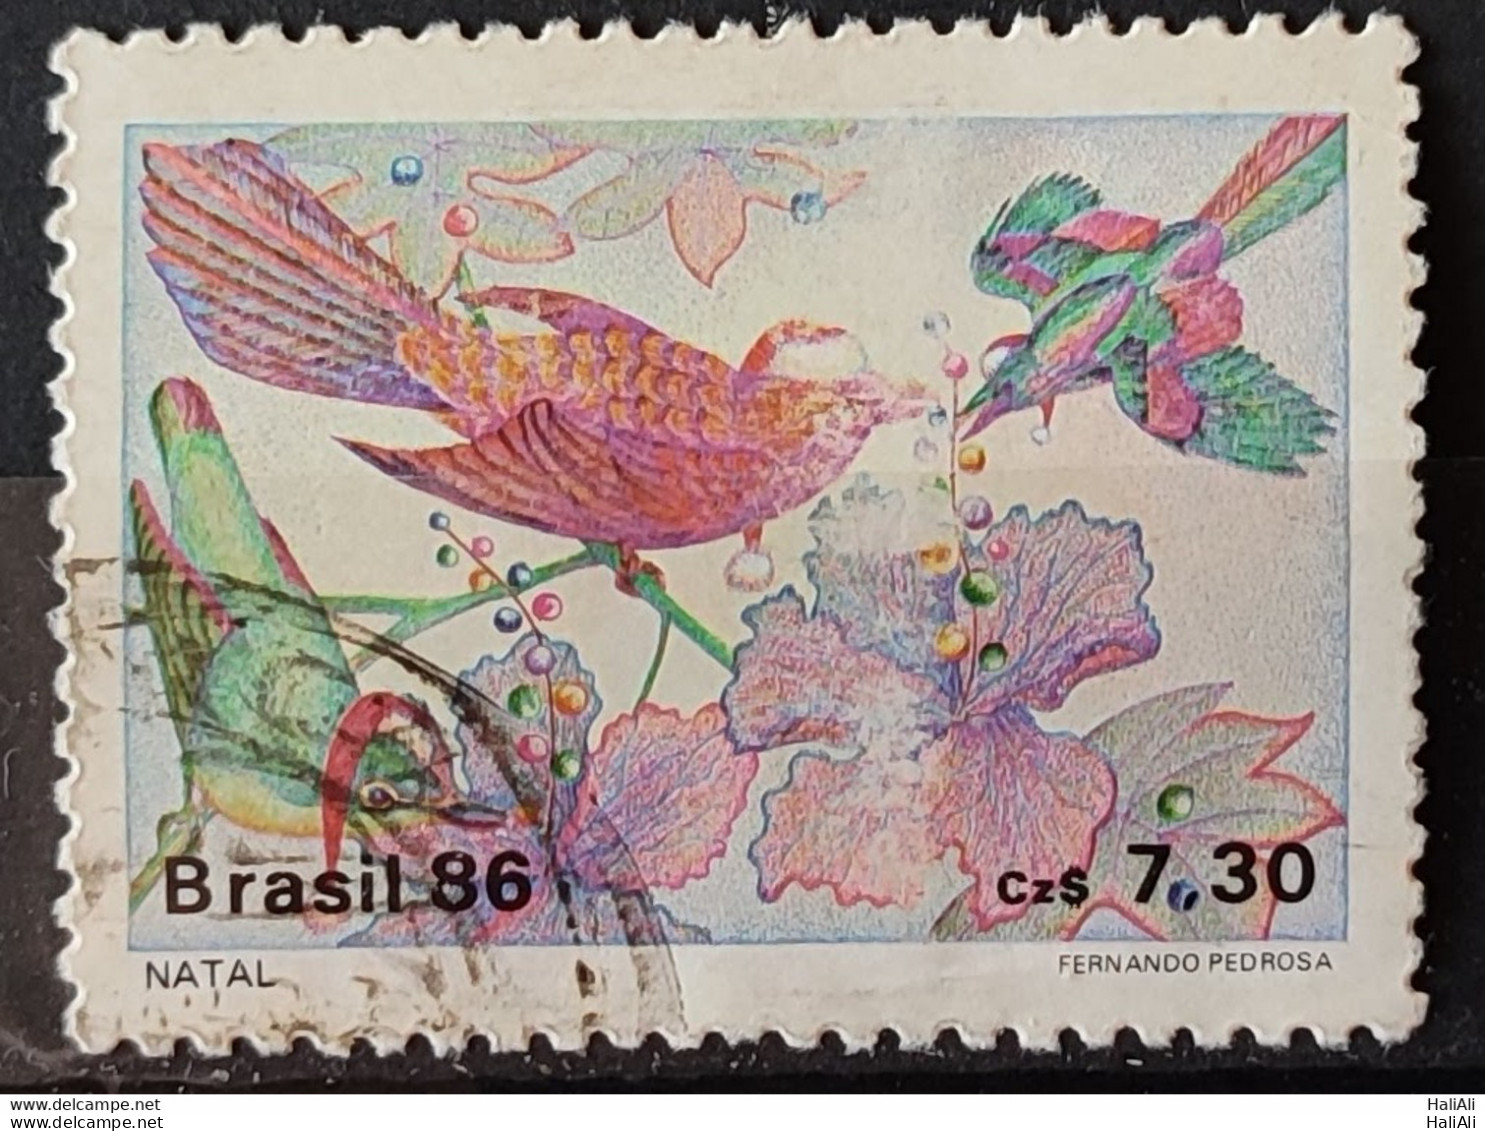 C 1532 Brazil Stamp Christmas Religion Birds 1986 Circulated 2.jpg - Used Stamps